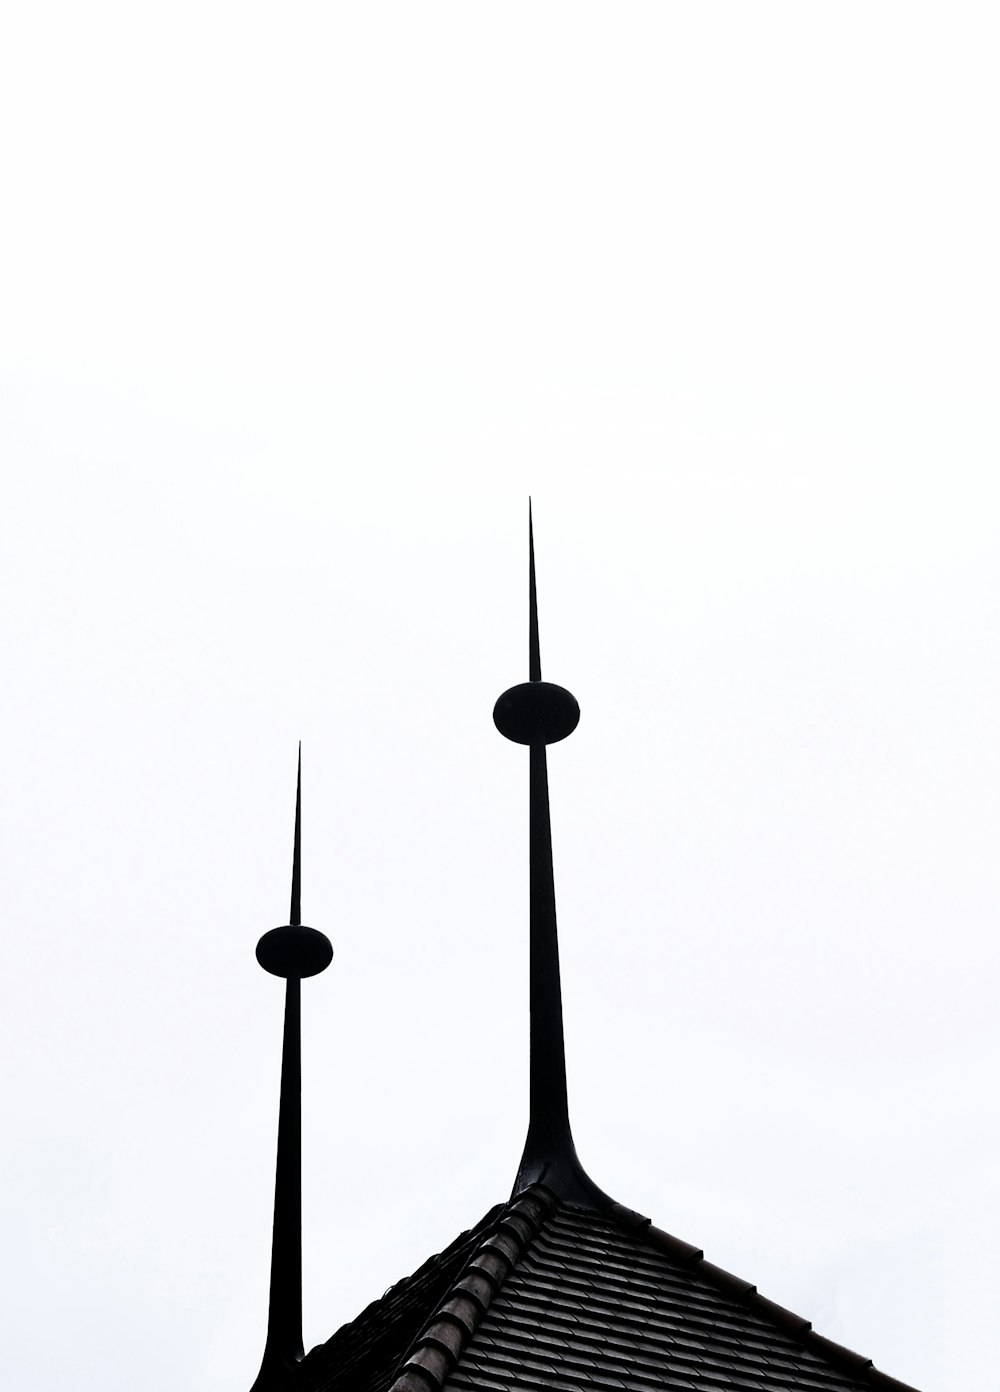 two black spires on top of a building